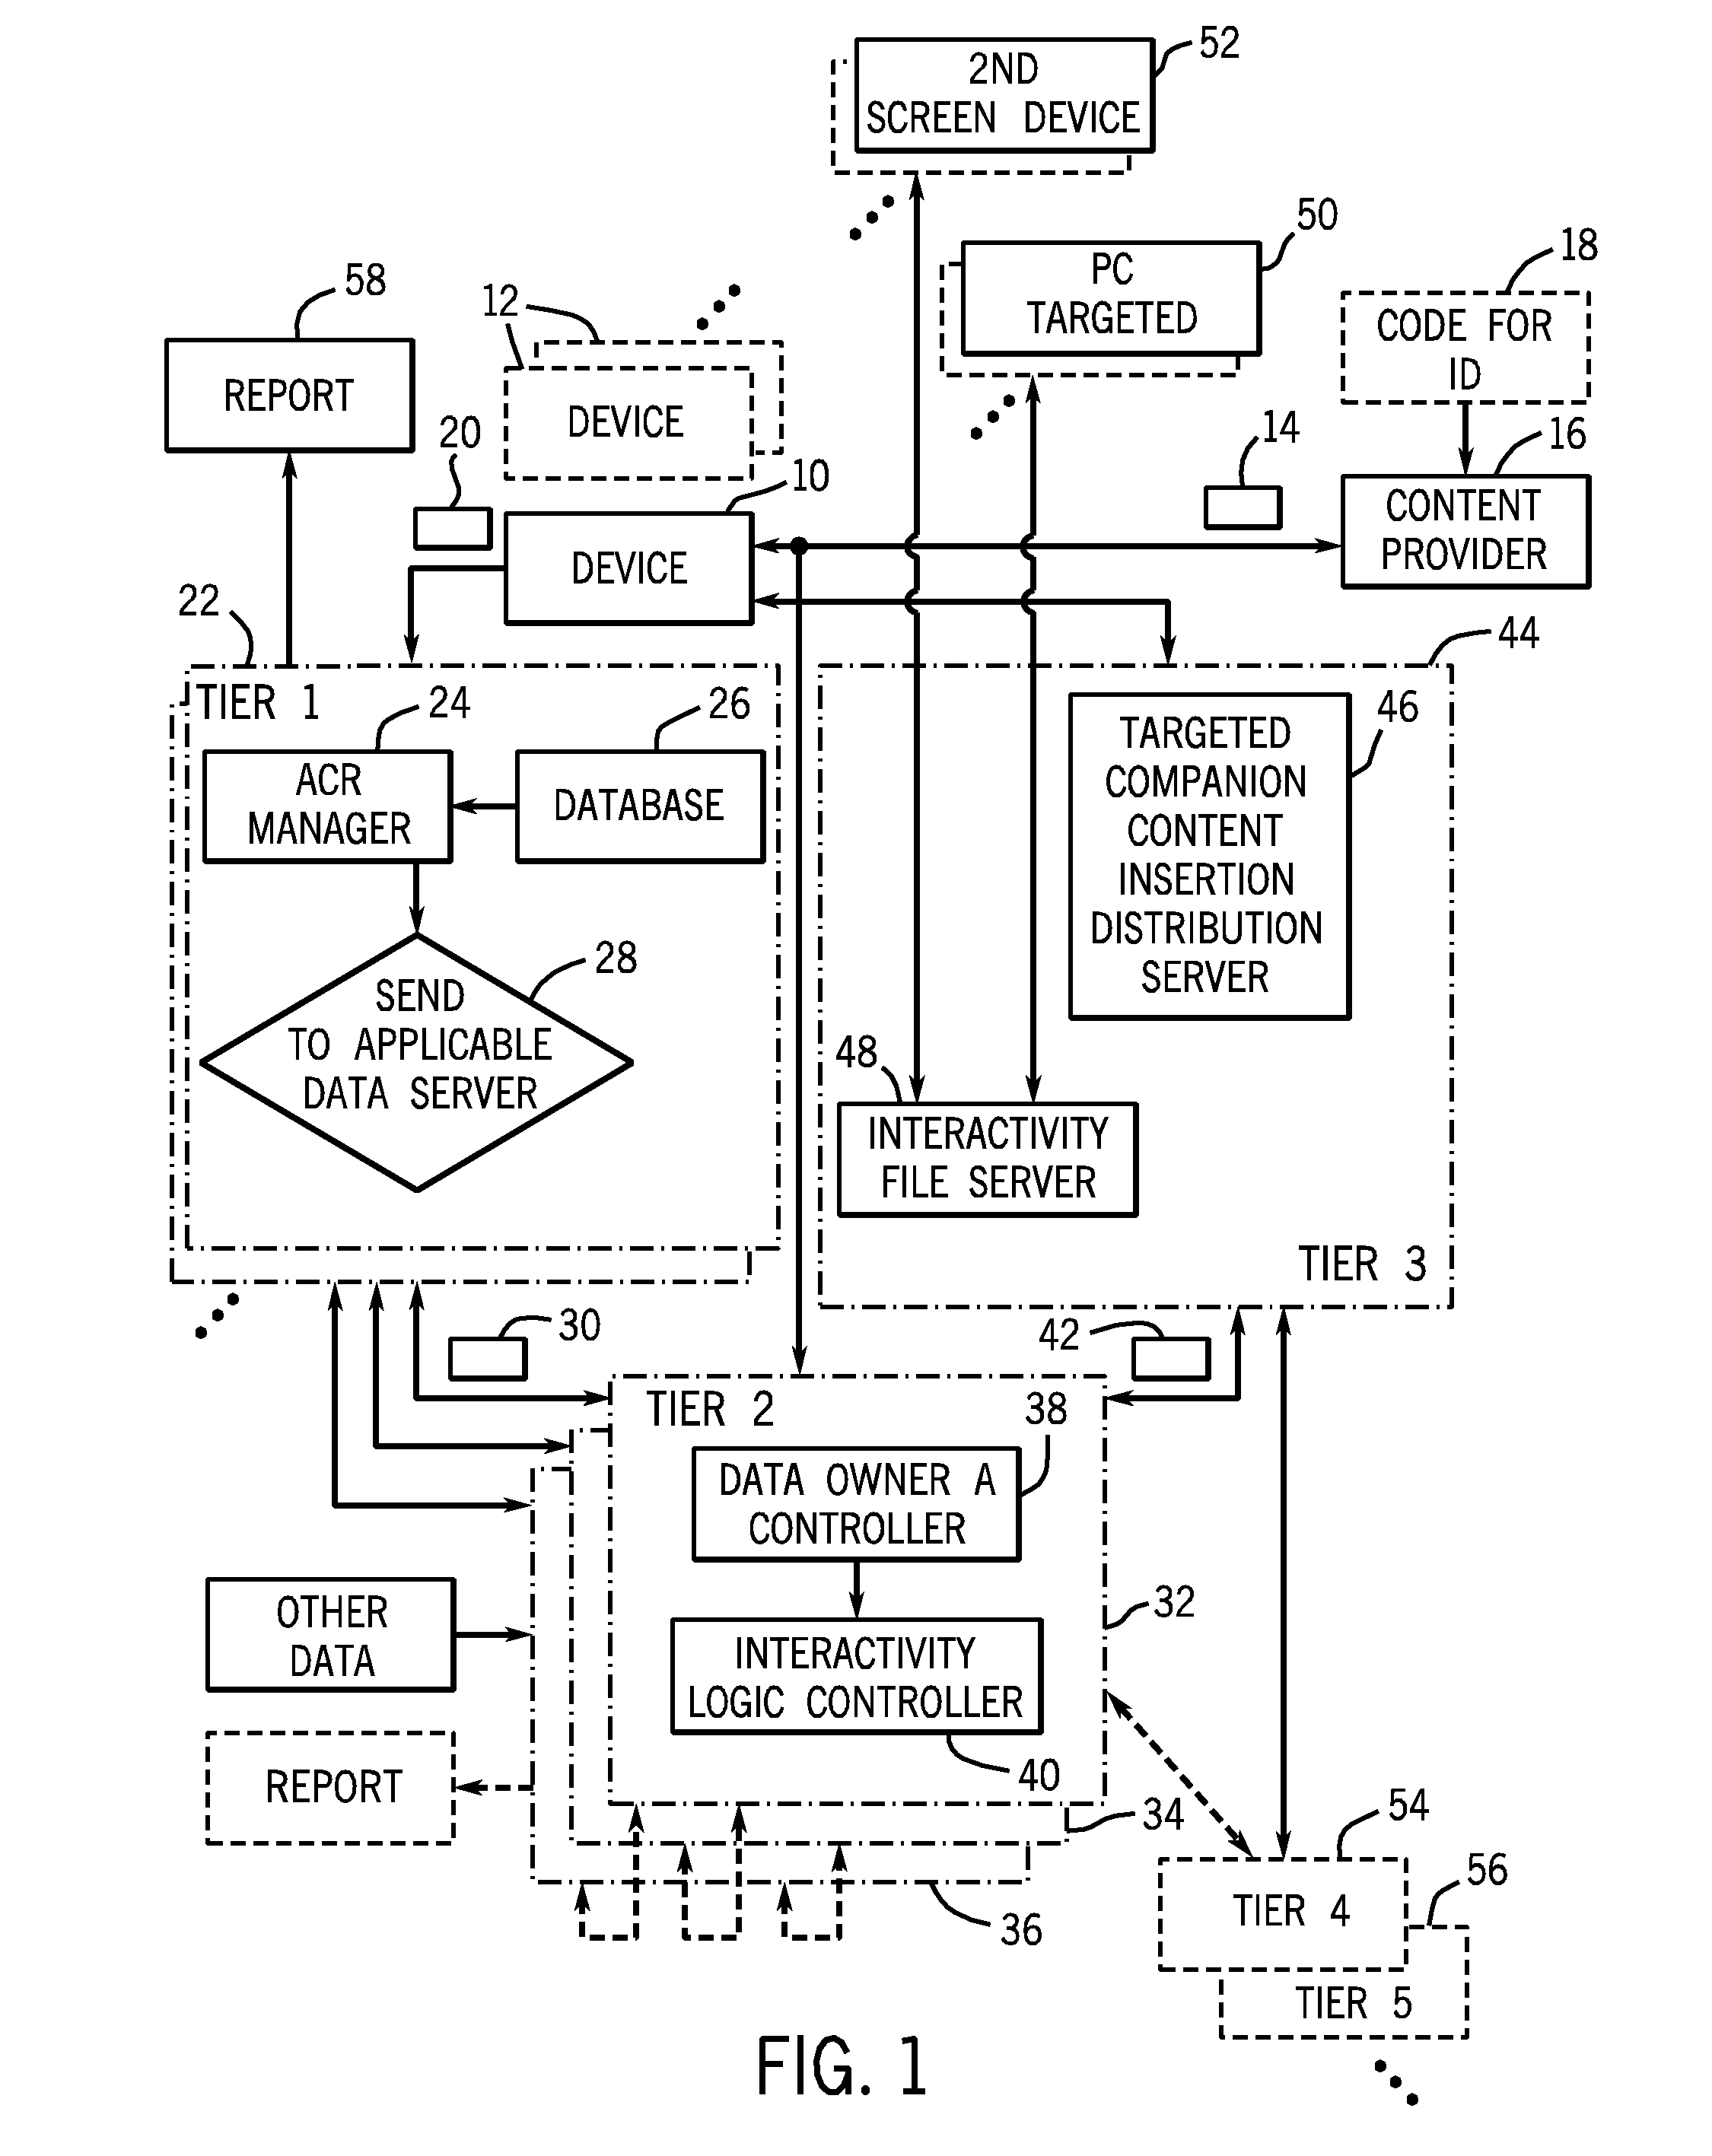 Multi-tiered automatic content recognition and processing